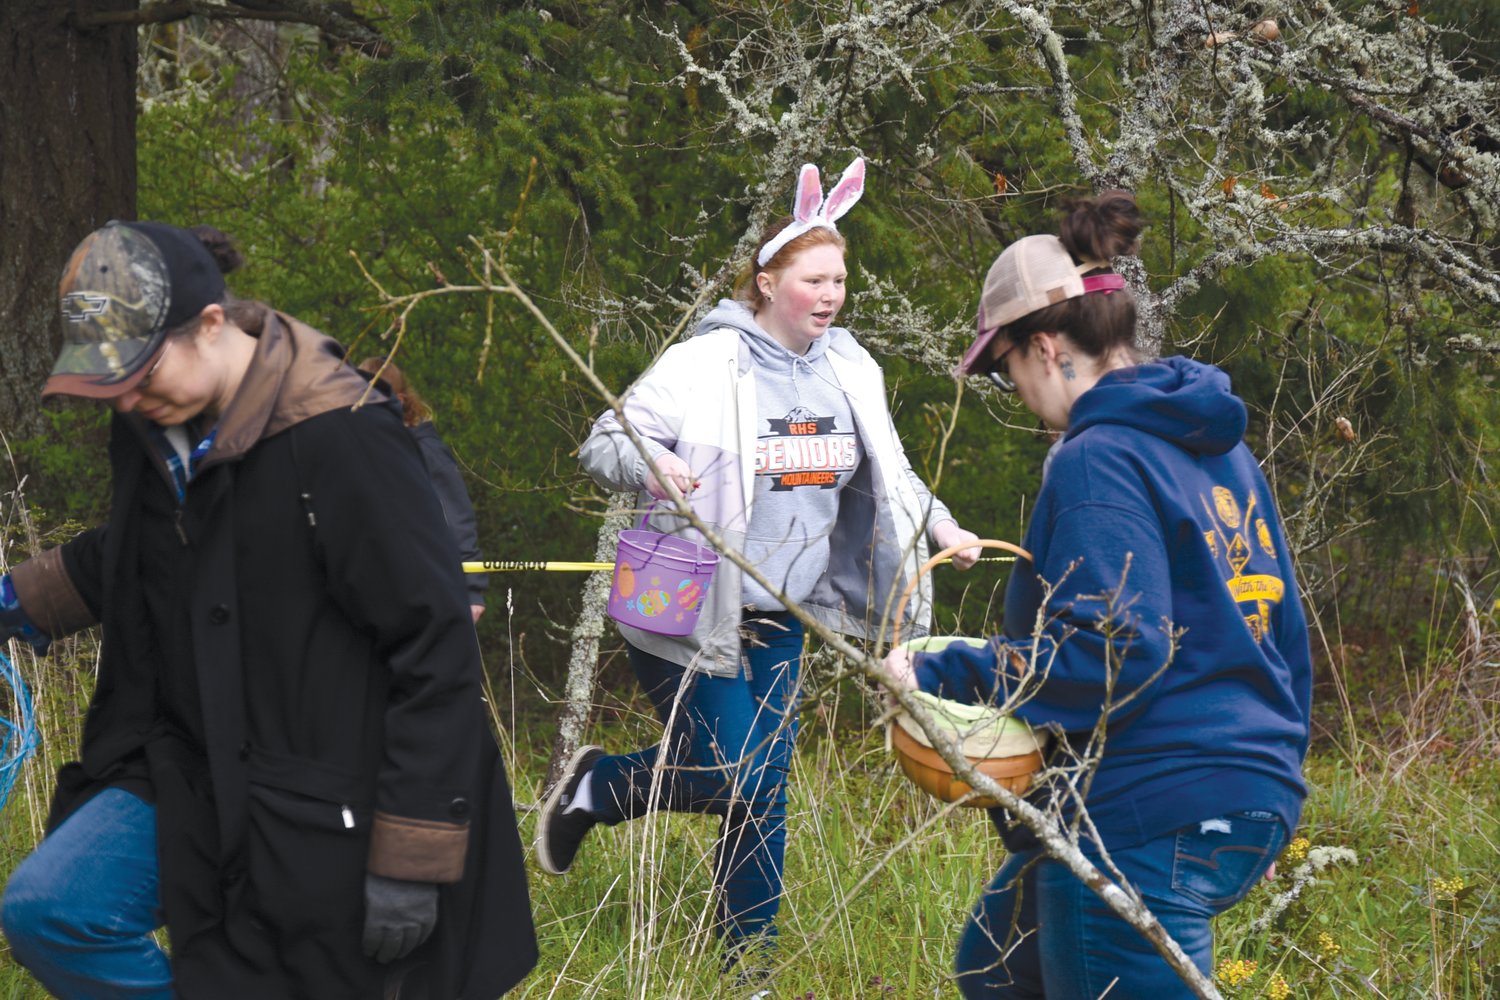 Adults scramble for eggs filled with candy and prizes in a hunt just for them on Saturday at Wilkowski Park in Rainier.